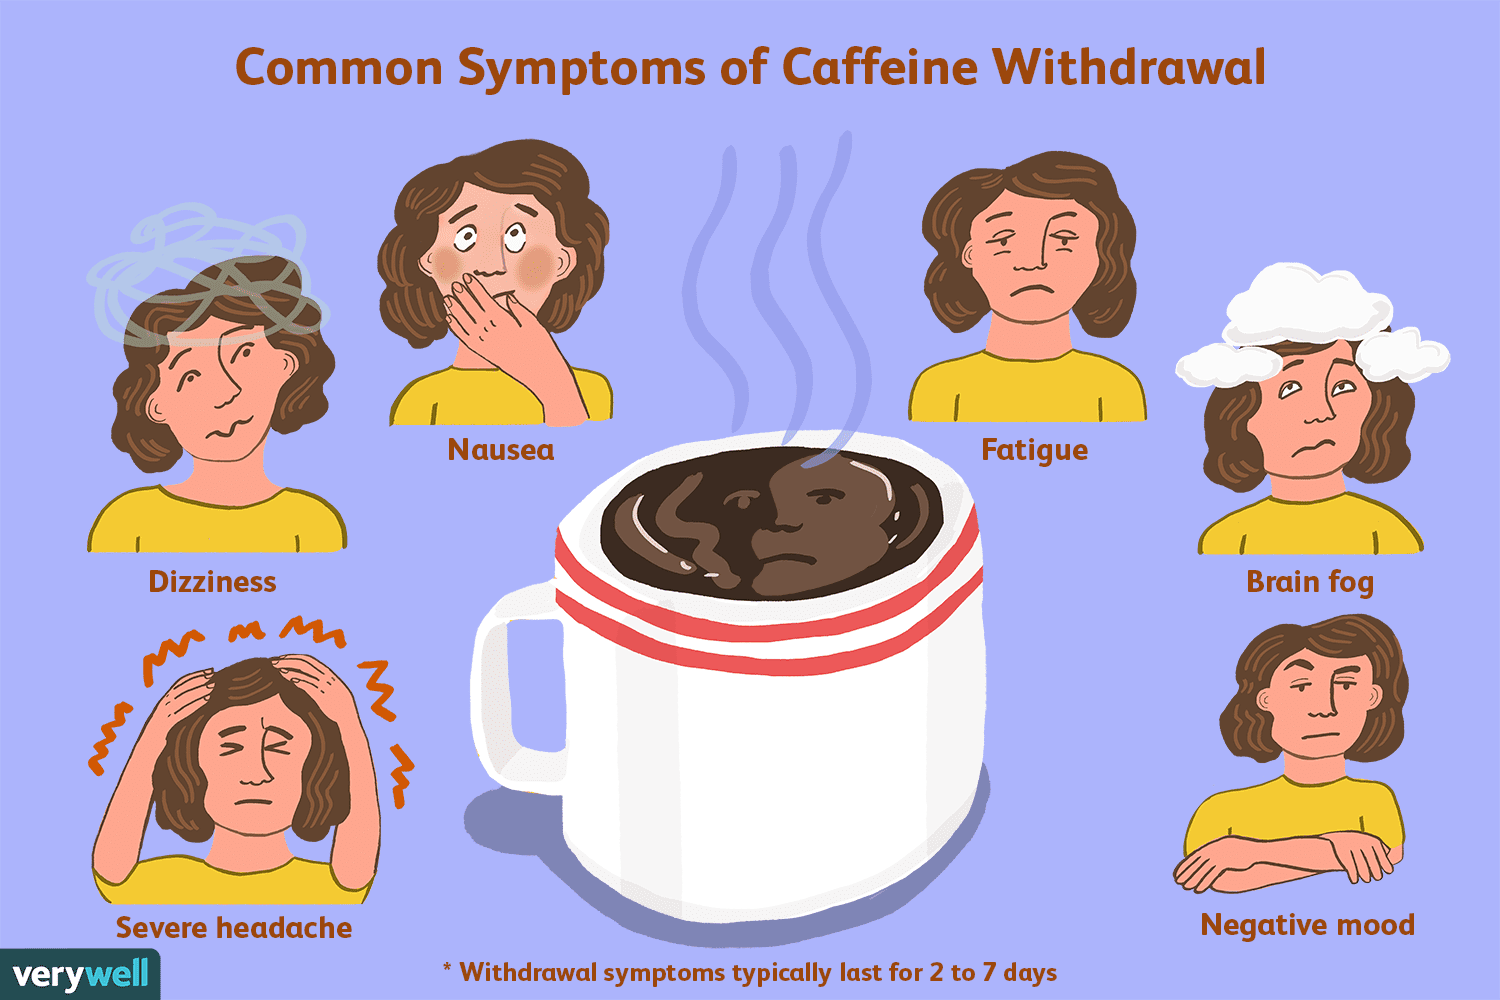 what-to-expect-from-caffeine-withdrawal-21844-v1-5c521bb246e0fb000180a7ec.png